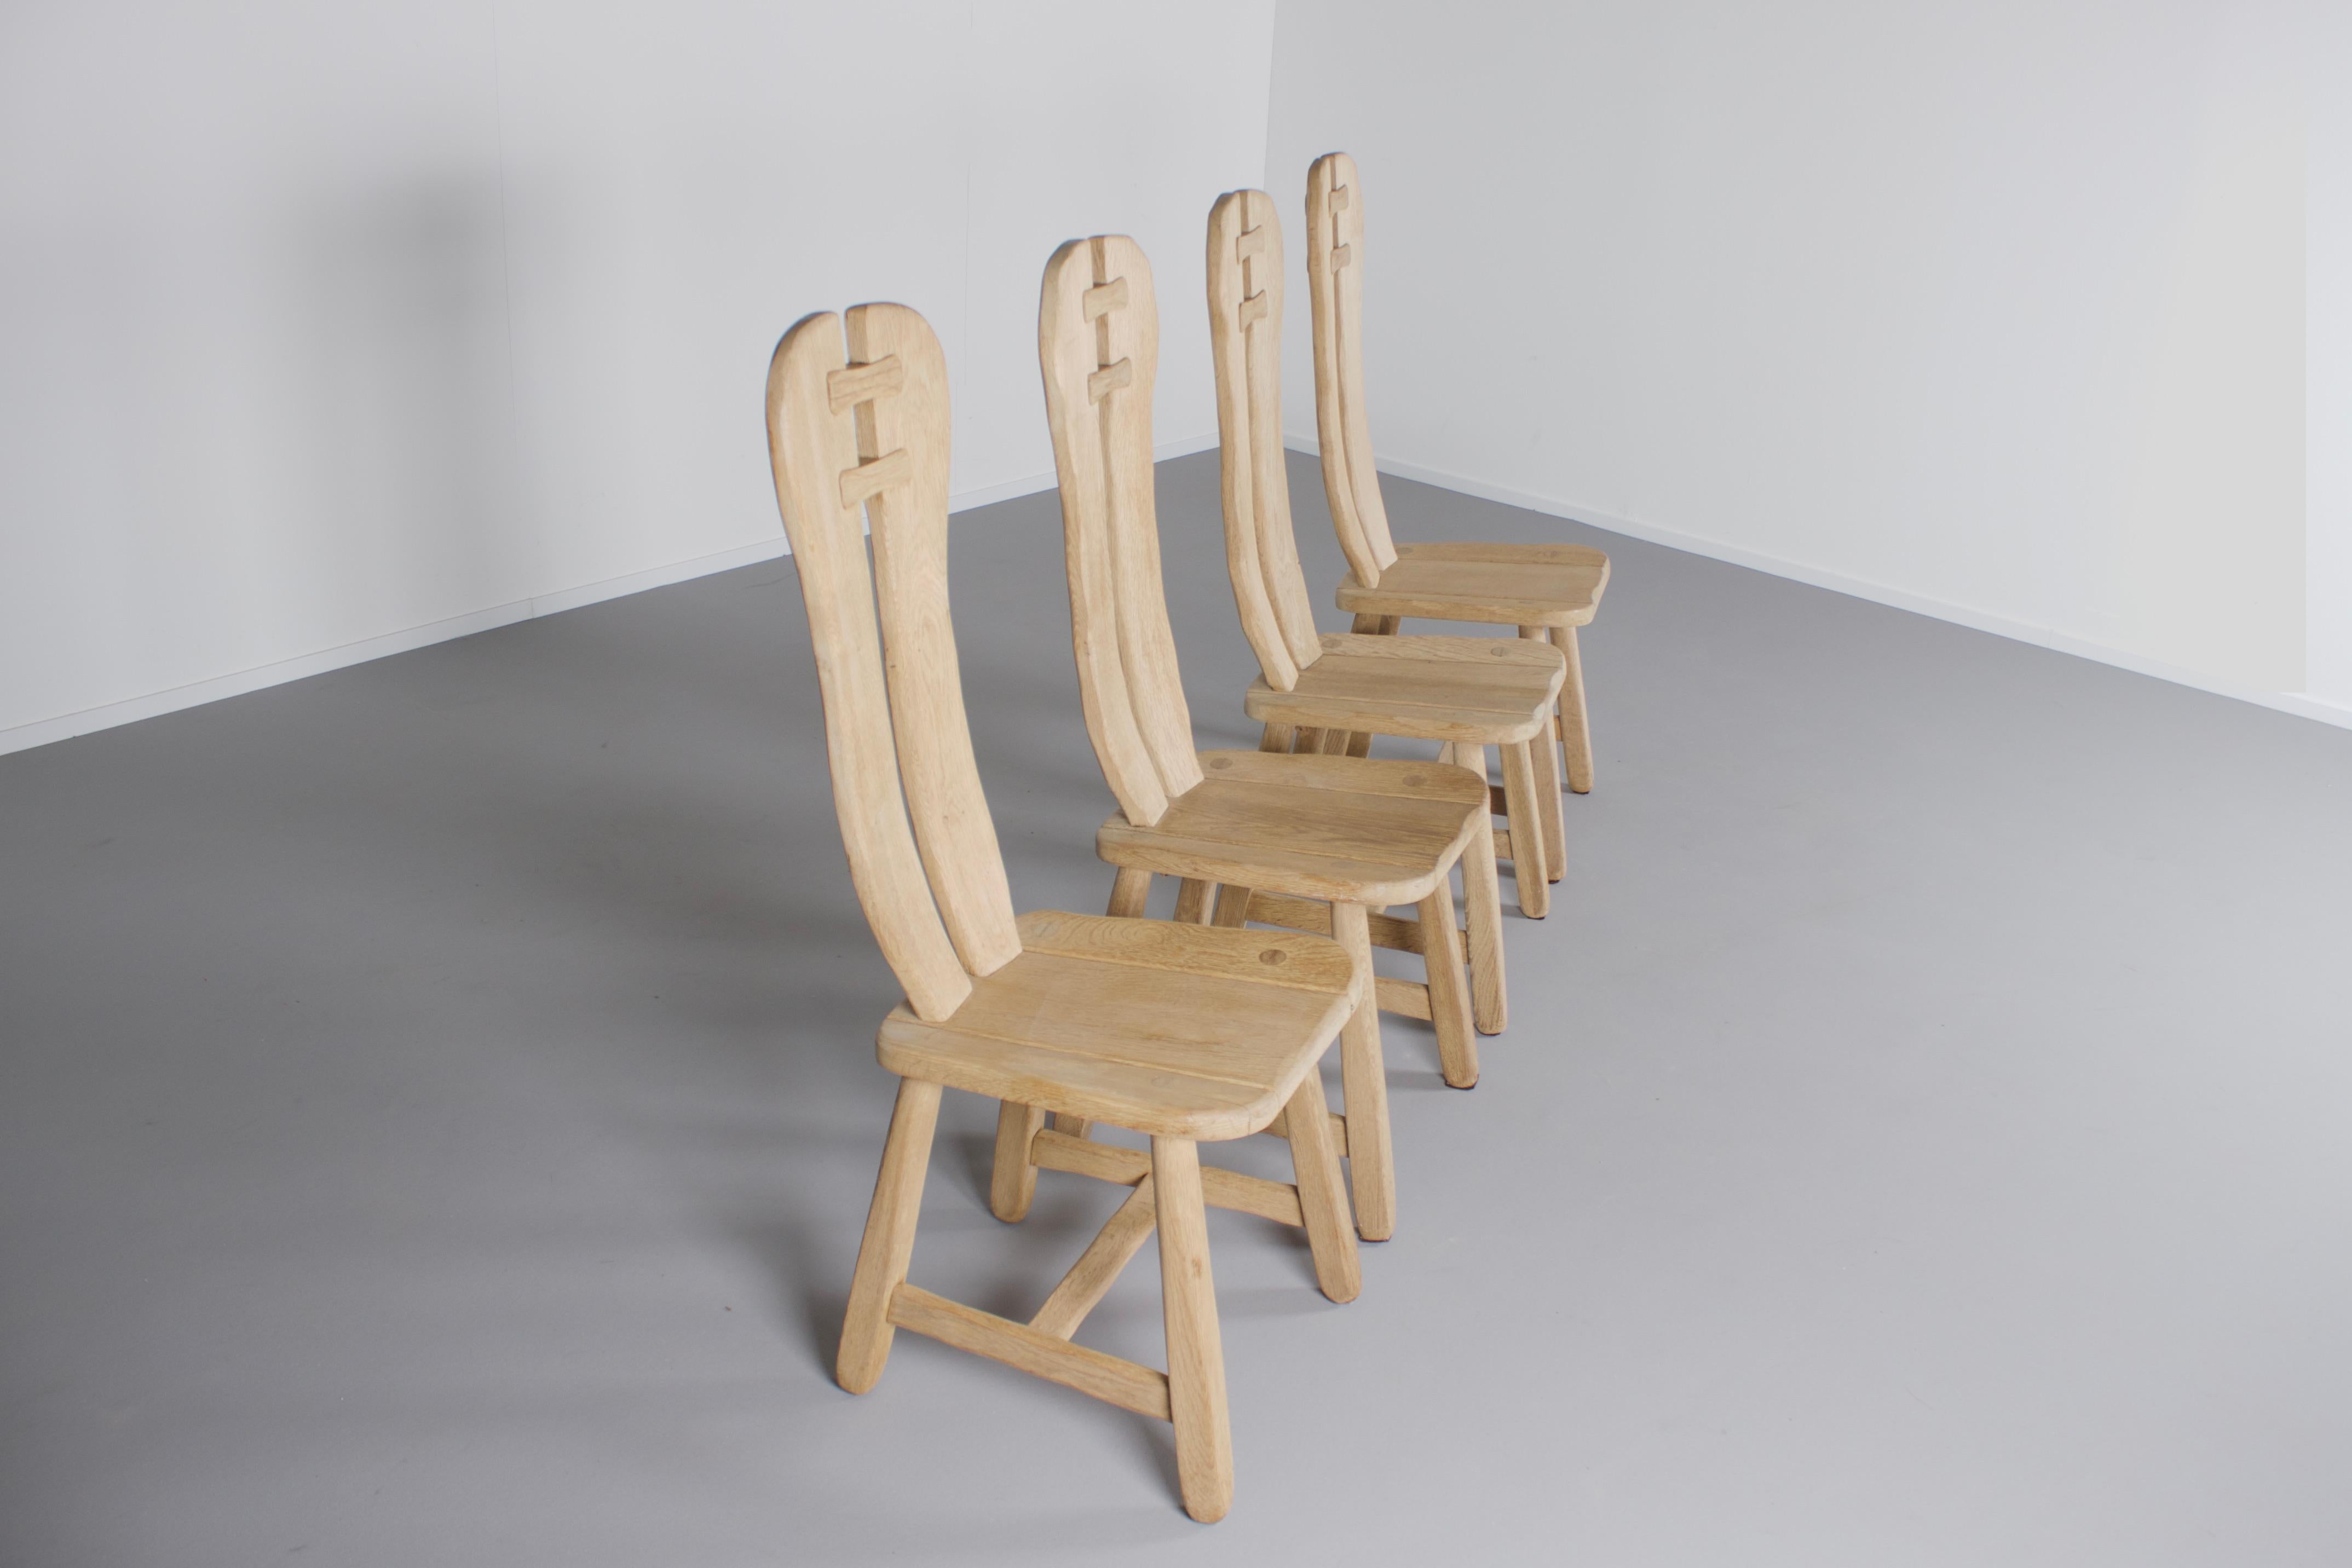 Very impressive sculptural chairs in very good condition. 

These chairs were made in the 1970s in Belgium by De Puyt.

They are made of solid oak wood and constructed with beautiful visible joints. 

The curved seat and back make these chairs very